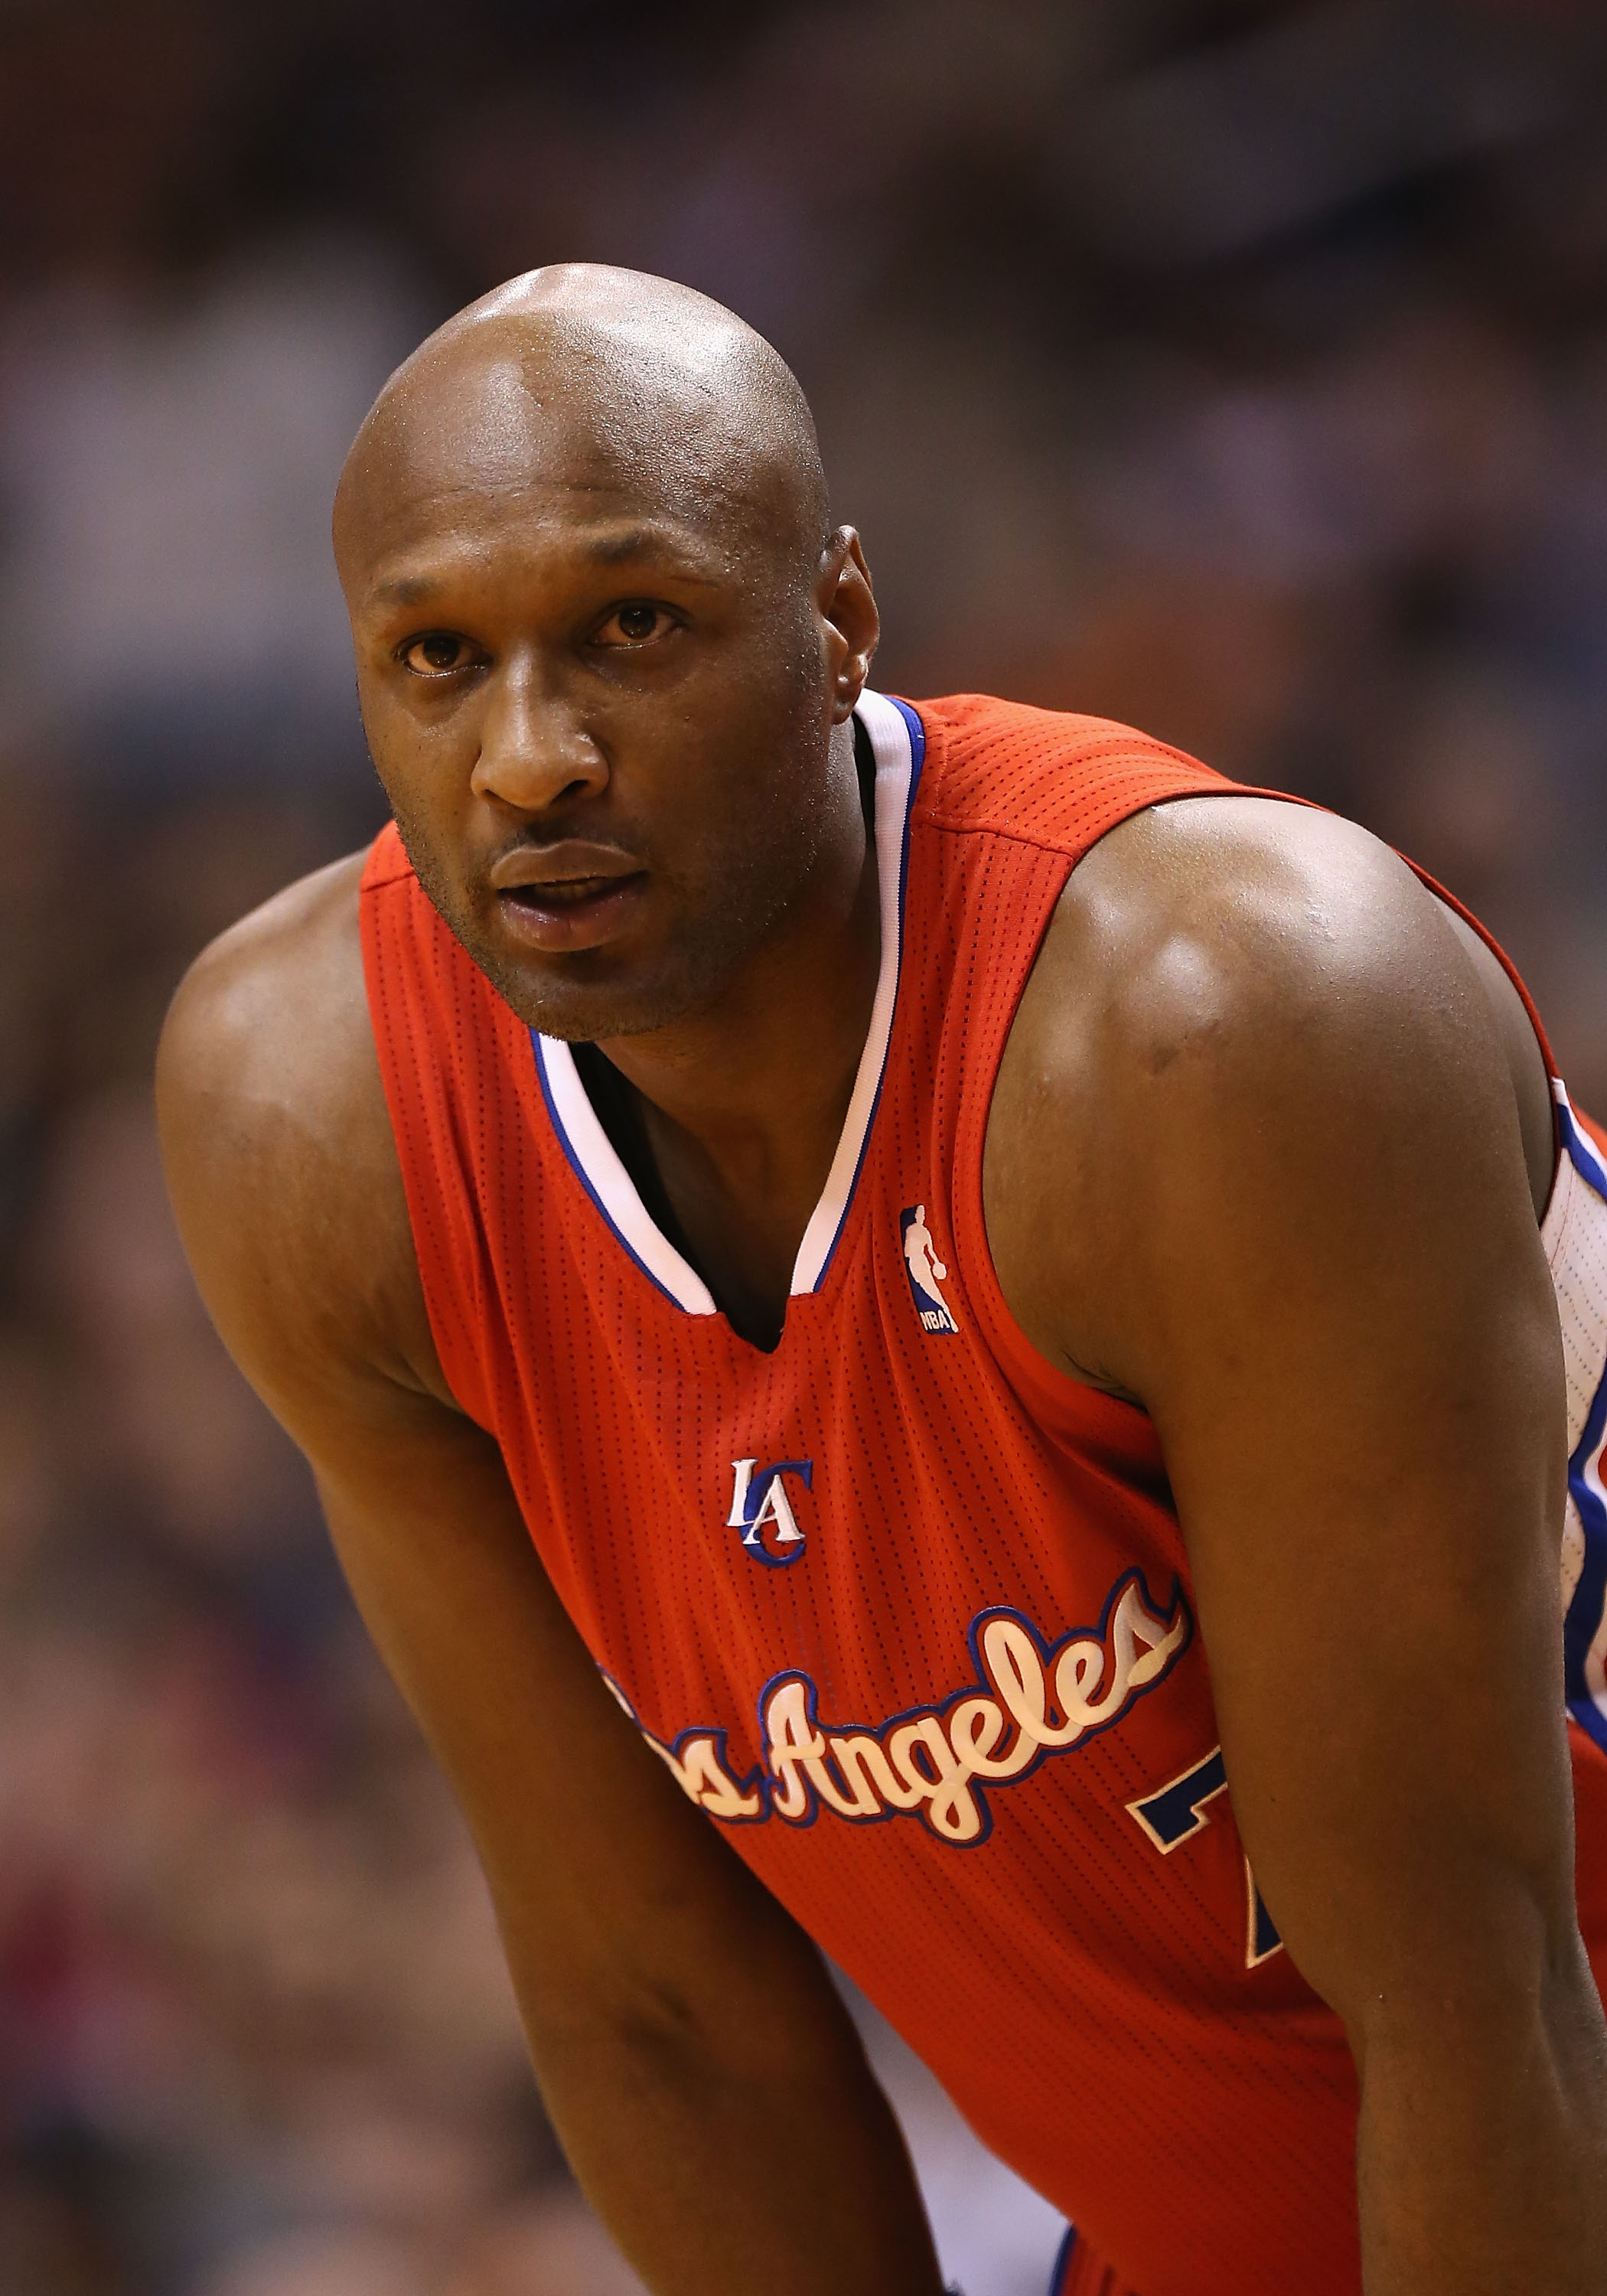 Odom was working on a music and fashion company outside of basketball. (Getty)